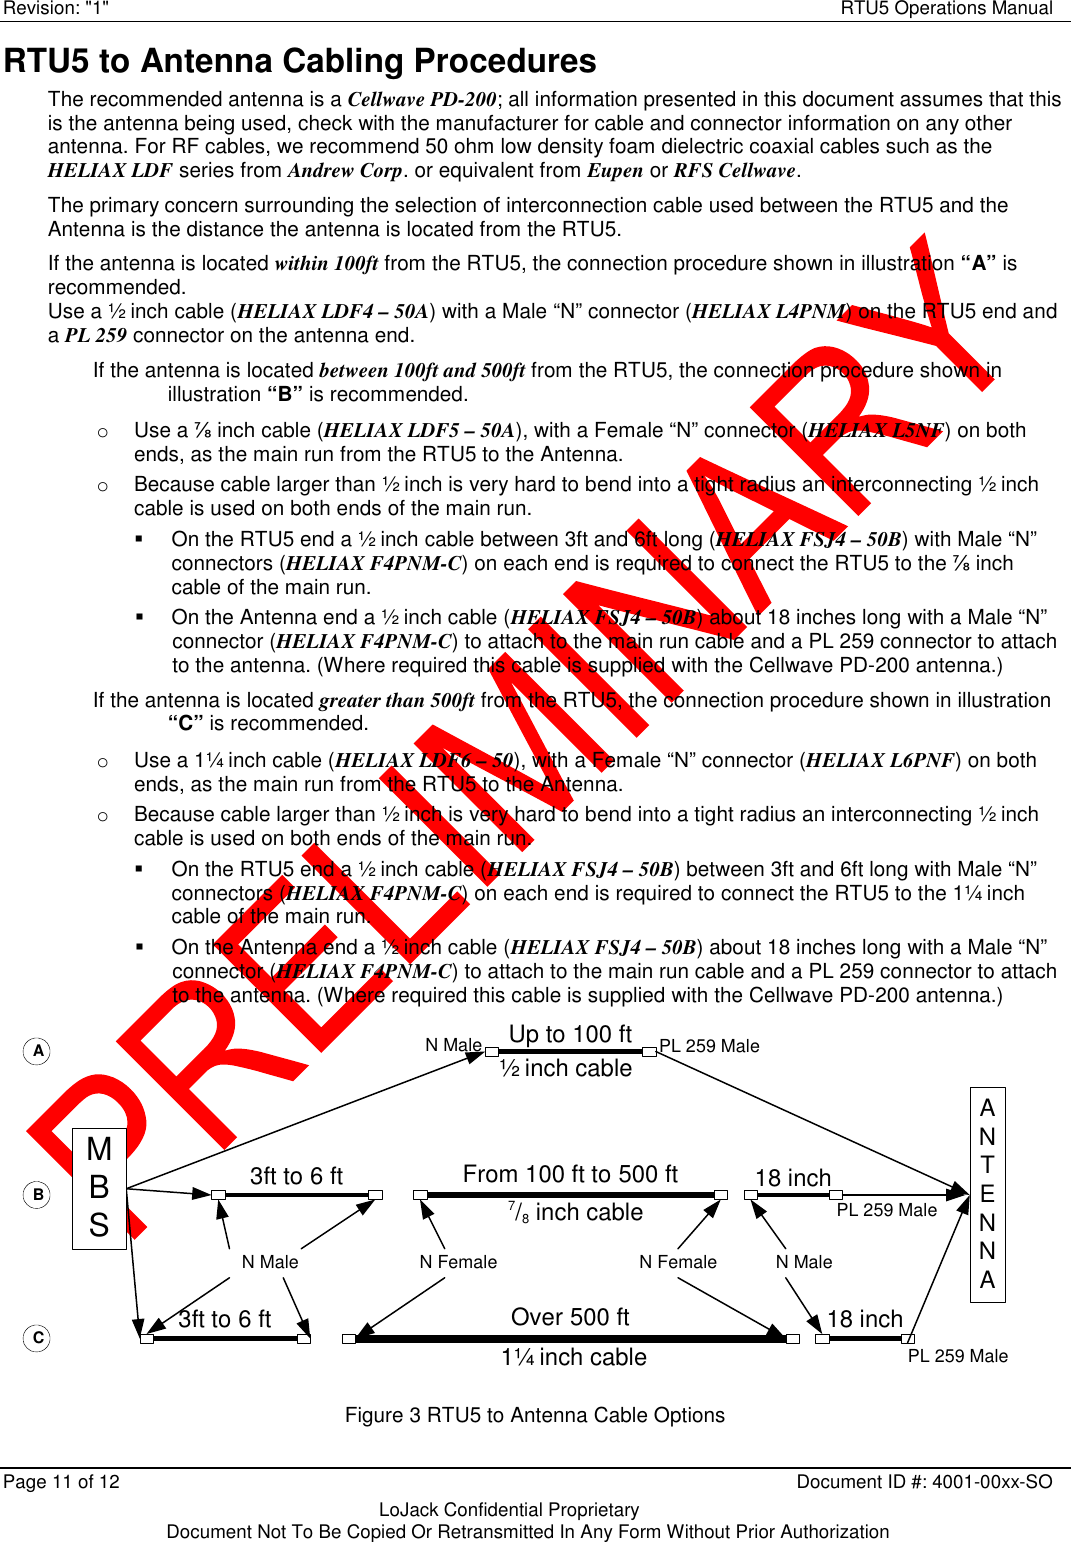 Revision: &quot;1&quot;    RTU5 Operations Manual Page 11 of 12    Document ID #: 4001-00xx-SO   LoJack Confidential Proprietary  Document Not To Be Copied Or Retransmitted In Any Form Without Prior Authorization RTU5 to Antenna Cabling Procedures The recommended antenna is a Cellwave PD-200; all information presented in this document assumes that this is the antenna being used, check with the manufacturer for cable and connector information on any other antenna. For RF cables, we recommend 50 ohm low density foam dielectric coaxial cables such as the HELIAX LDF series from Andrew Corp. or equivalent from Eupen or RFS Cellwave. The primary concern surrounding the selection of interconnection cable used between the RTU5 and the Antenna is the distance the antenna is located from the RTU5. If the antenna is located within 100ft from the RTU5, the connection procedure shown in illustration “A” is recommended. Use a ½ inch cable (HELIAX LDF4 – 50A) with a Male “N” connector (HELIAX L4PNM) on the RTU5 end and a PL 259 connector on the antenna end. If the antenna is located between 100ft and 500ft from the RTU5, the connection procedure shown in illustration “B” is recommended. o  Use a ⅞ inch cable (HELIAX LDF5 – 50A), with a Female “N” connector (HELIAX L5NF) on both ends, as the main run from the RTU5 to the Antenna.  o  Because cable larger than ½ inch is very hard to bend into a tight radius an interconnecting ½ inch cable is used on both ends of the main run.     On the RTU5 end a ½ inch cable between 3ft and 6ft long (HELIAX FSJ4 – 50B) with Male “N” connectors (HELIAX F4PNM-C) on each end is required to connect the RTU5 to the ⅞ inch cable of the main run.   On the Antenna end a ½ inch cable (HELIAX FSJ4 – 50B) about 18 inches long with a Male “N” connector (HELIAX F4PNM-C) to attach to the main run cable and a PL 259 connector to attach to the antenna. (Where required this cable is supplied with the Cellwave PD-200 antenna.) If the antenna is located greater than 500ft from the RTU5, the connection procedure shown in illustration “C” is recommended. o  Use a 1¼ inch cable (HELIAX LDF6 – 50), with a Female “N” connector (HELIAX L6PNF) on both ends, as the main run from the RTU5 to the Antenna.  o  Because cable larger than ½ inch is very hard to bend into a tight radius an interconnecting ½ inch cable is used on both ends of the main run.     On the RTU5 end a ½ inch cable (HELIAX FSJ4 – 50B) between 3ft and 6ft long with Male “N” connectors (HELIAX F4PNM-C) on each end is required to connect the RTU5 to the 1¼ inch cable of the main run.   On the Antenna end a ½ inch cable (HELIAX FSJ4 – 50B) about 18 inches long with a Male “N” connector (HELIAX F4PNM-C) to attach to the main run cable and a PL 259 connector to attach to the antenna. (Where required this cable is supplied with the Cellwave PD-200 antenna.) Figure 3 RTU5 to Antenna Cable Options Up to 100 ftFrom 100 ft to 500 ftOver 500 ftABC3ft to 6 ft3ft to 6 ft18 inch18 inchN MaleN MaleN Male N Female N FemalePL 259 MalePL 259 MalePL 259 MaleANTENNAMBS½ inch cable7/8 inch cable1¼ inch cable